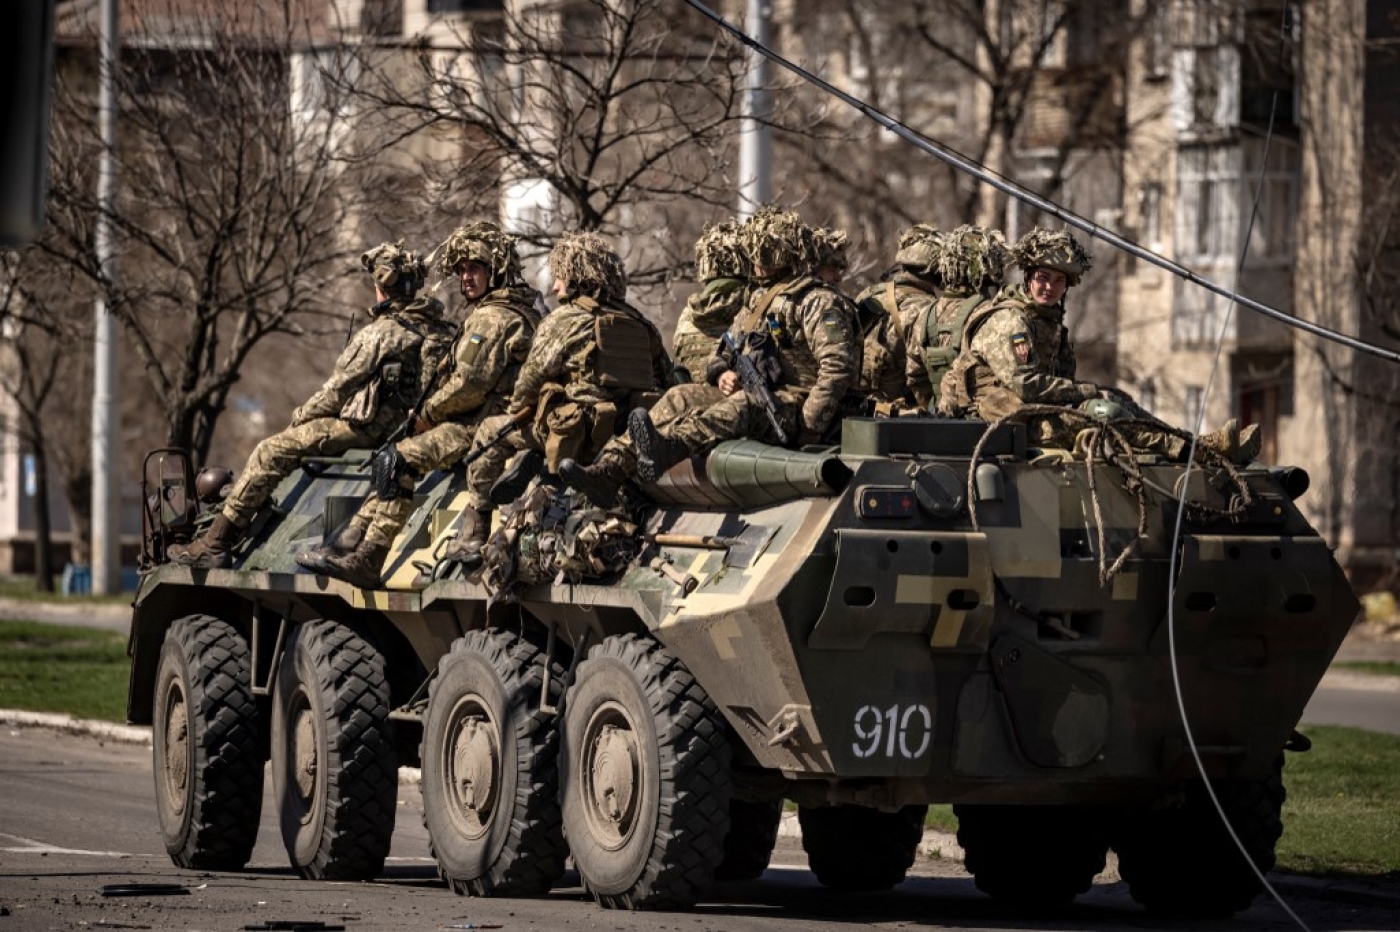 Ukrainian soldiers ride on a armoured military vehicle in the city of Severodonetsk, Donbas region, 7 April 2022 (AFP)